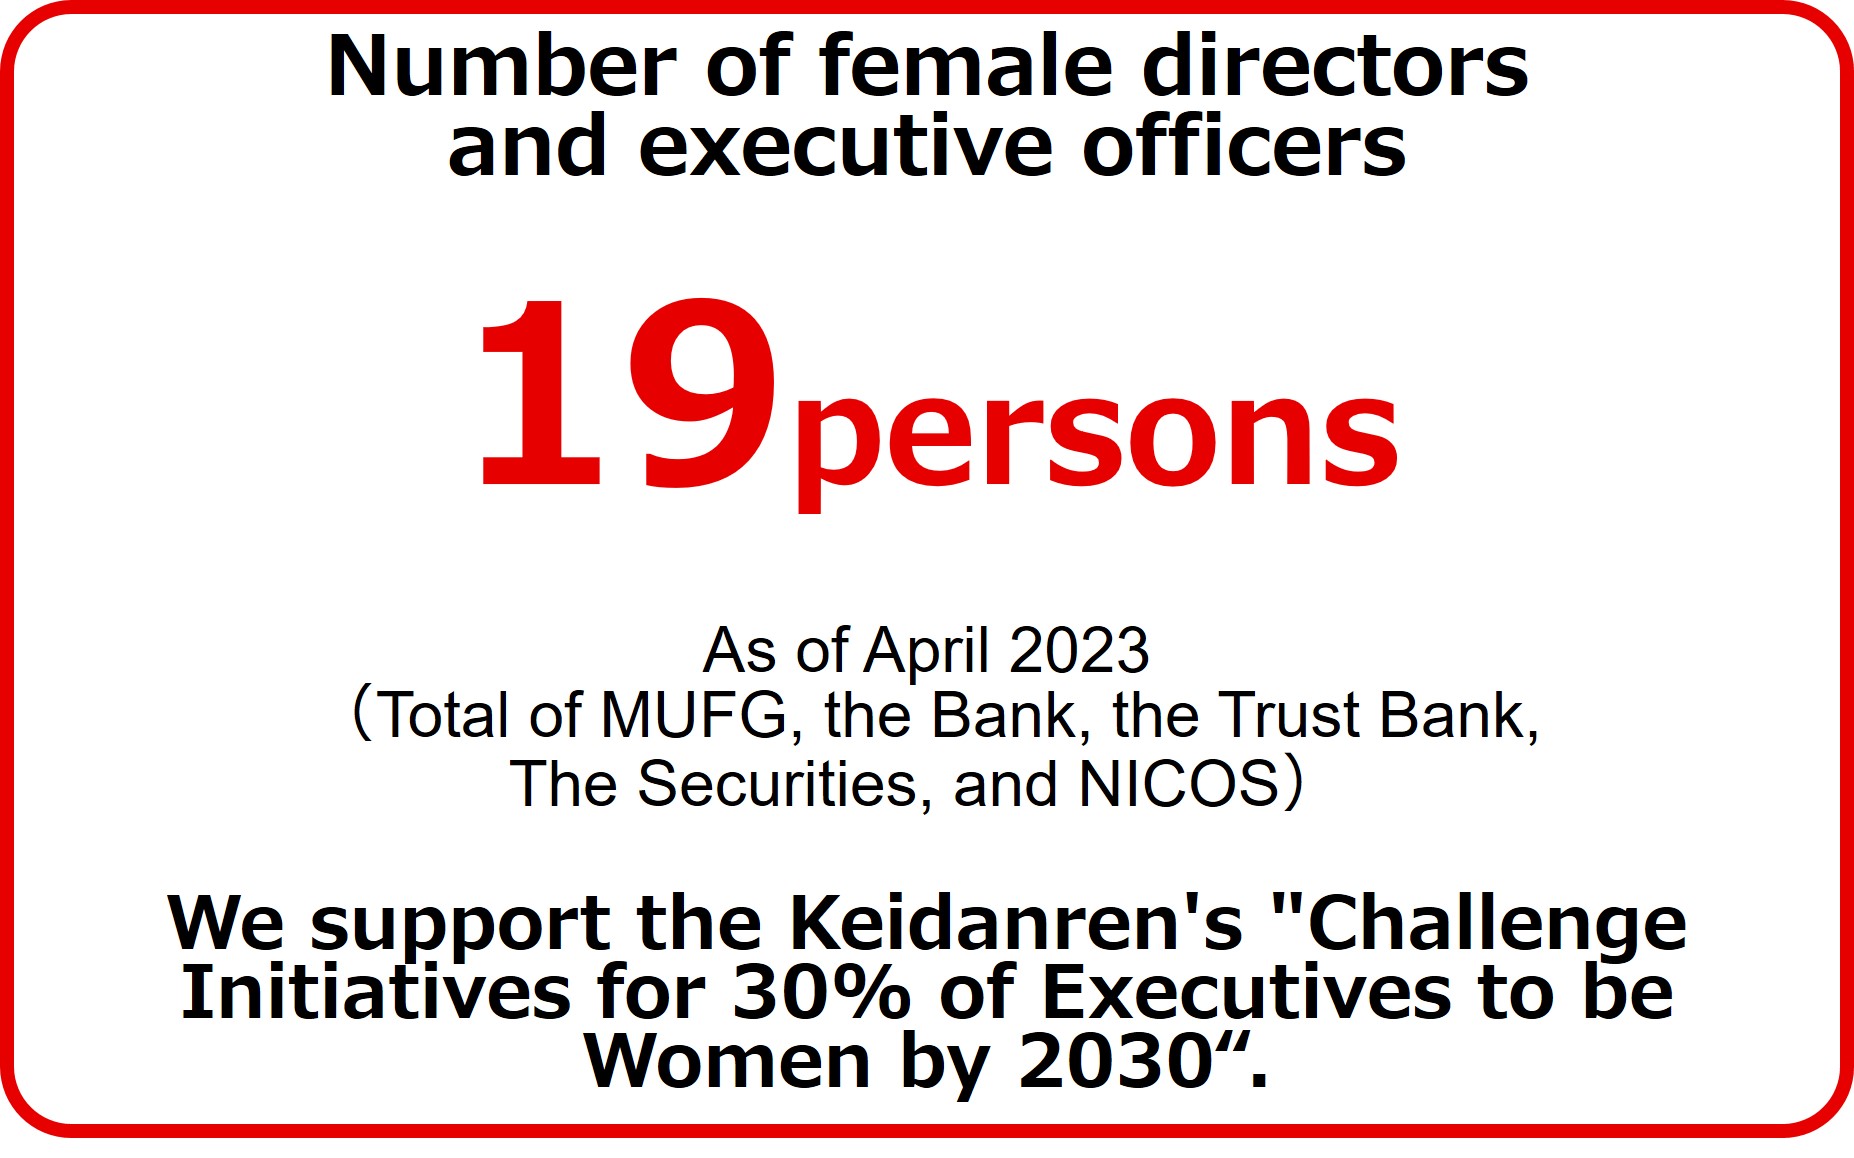 Number of female directors and executive officers